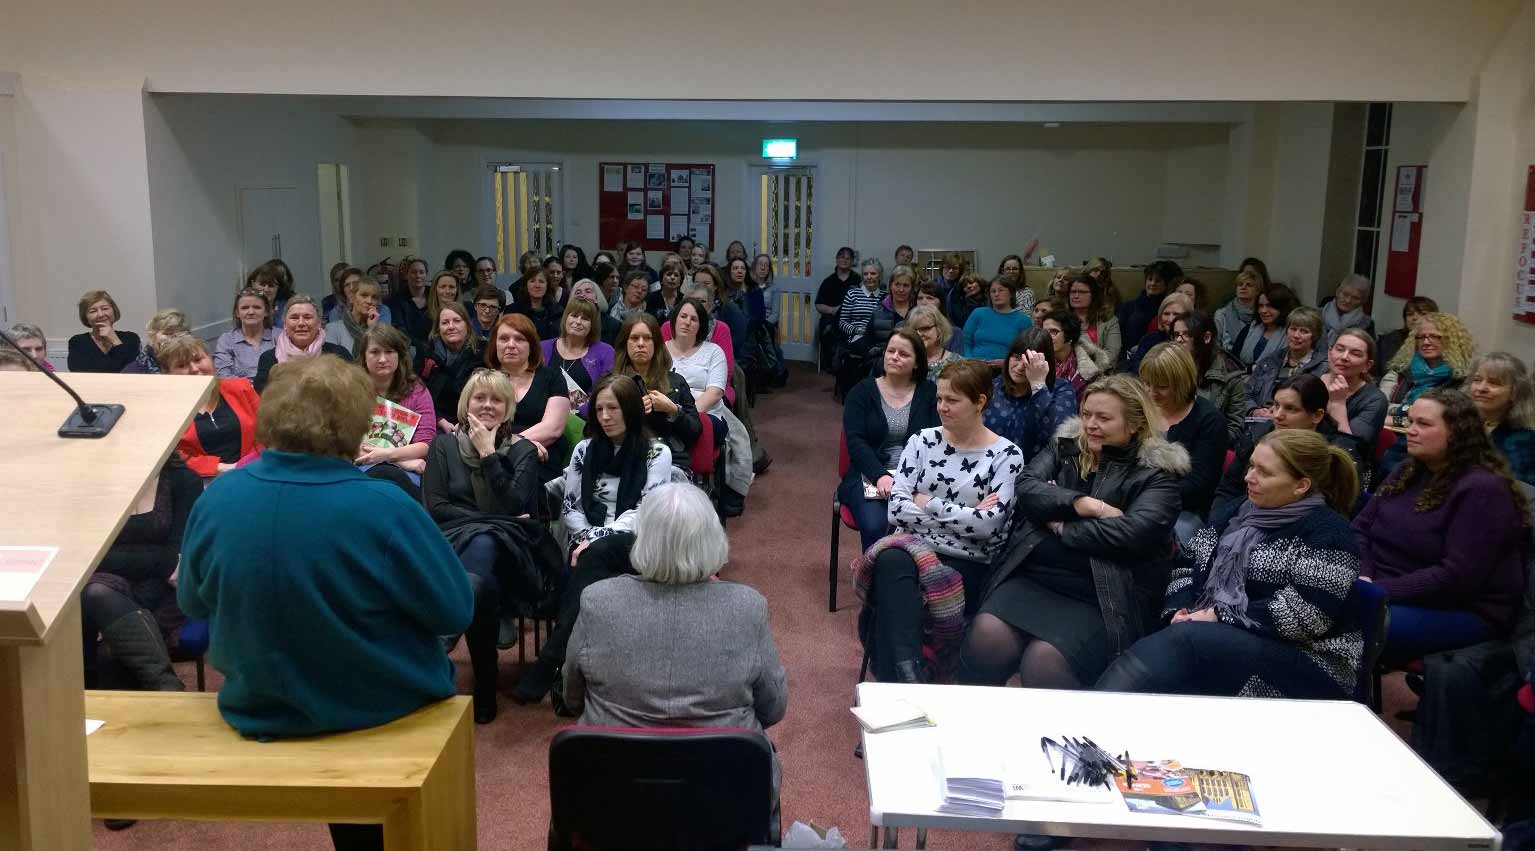 An initial meeting to form a new WI in Harrogate in 2016 saw more than 120 women turn up, resulting in four new WIs being created